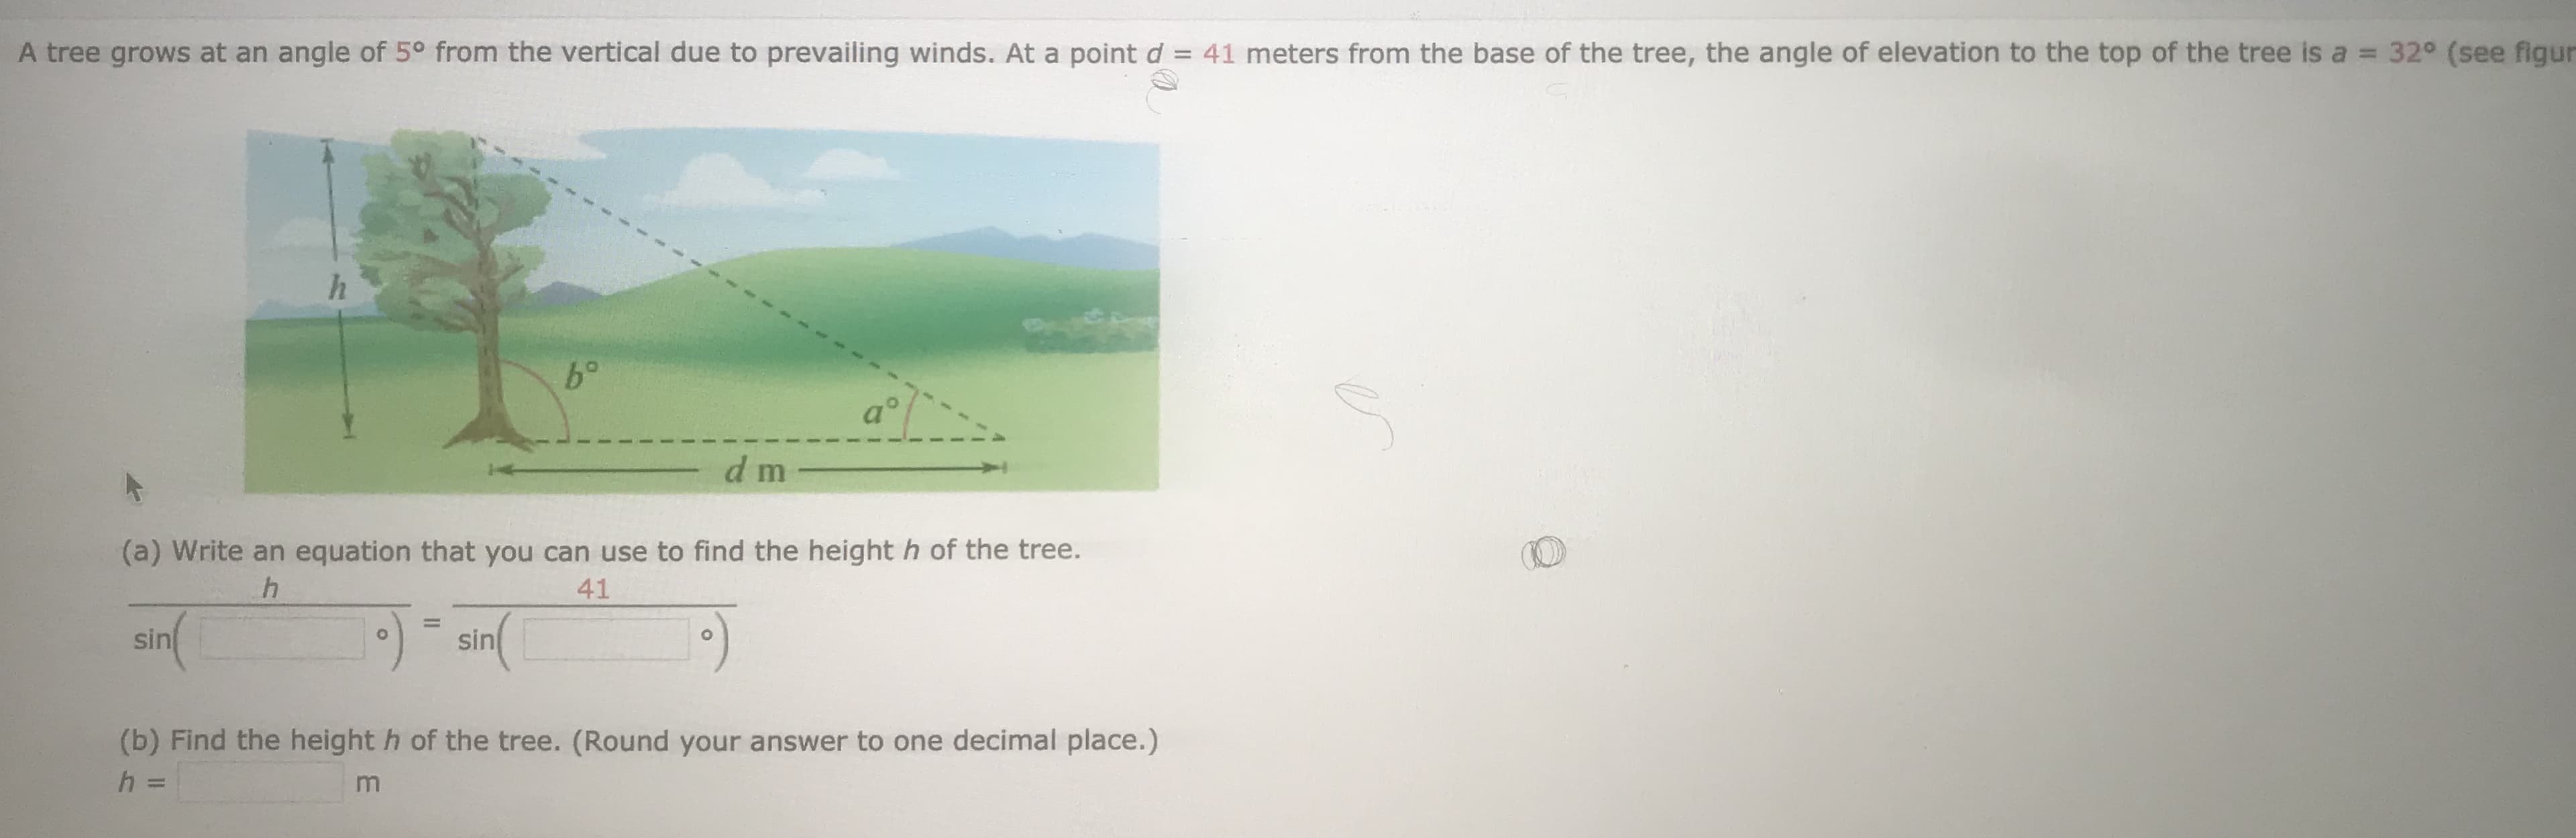 A tree grows at an angle of 5° from the vertical due to prevailing winds. At a point d = 41 meters from the base of the tree, the angle of elevation to the top of the tree is a = 32° (see figur
b°
d m
(a) Write an equation that you can use to find the height h of the tree.
41
sin
) sin(
%3D
(b) Find the height h of the tree. (Round your answer to one decimal place.)
h.
%3D
